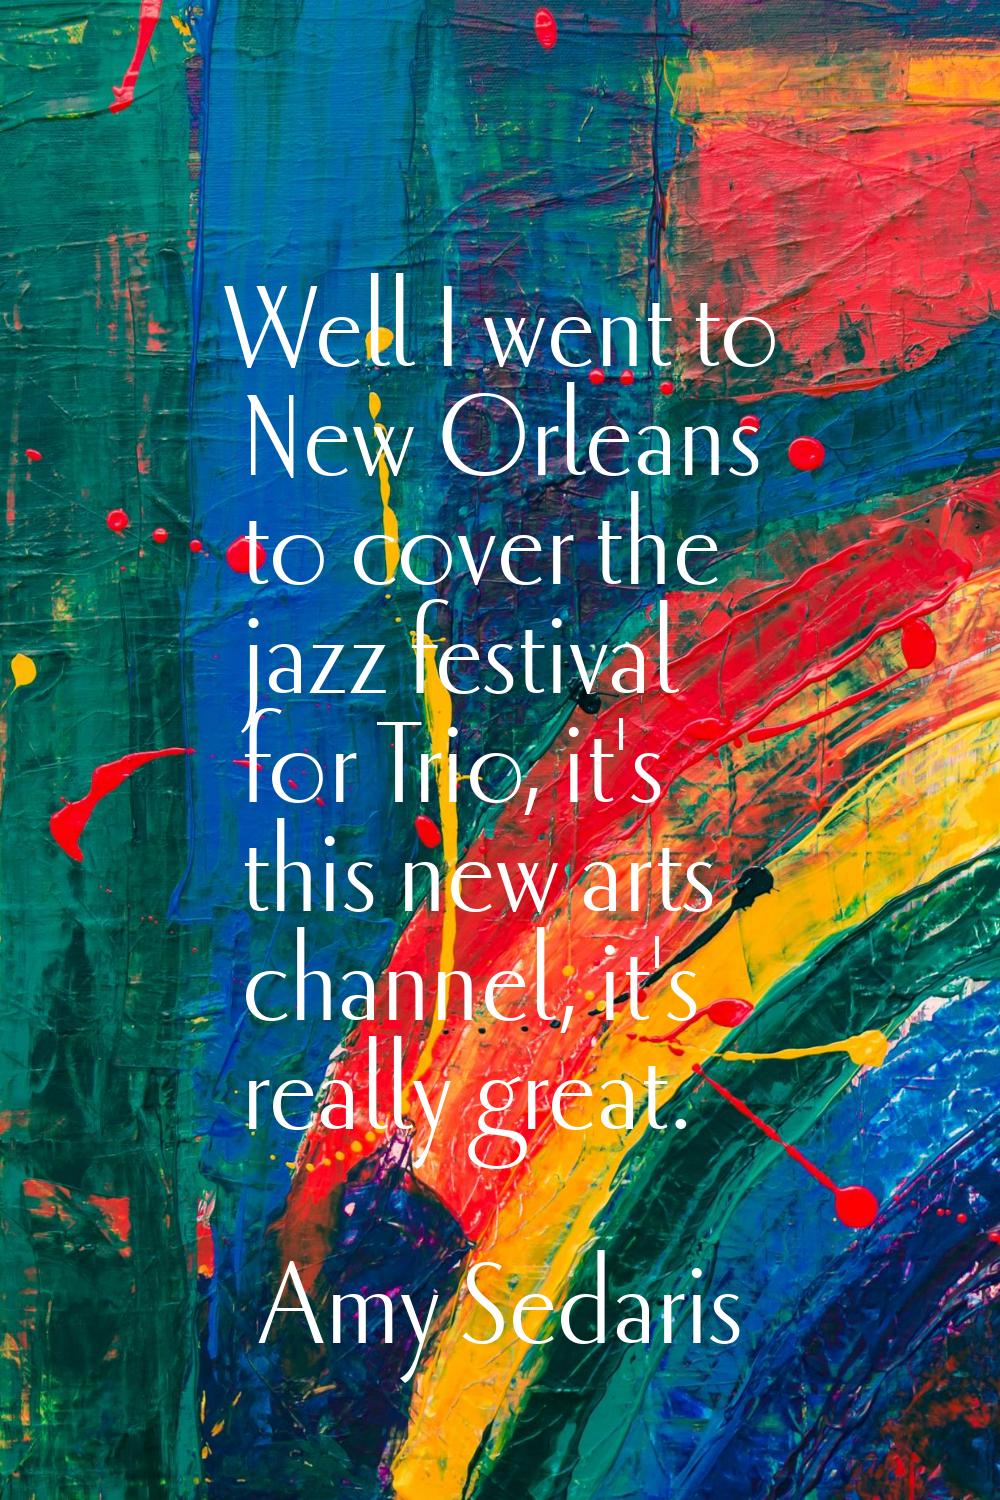 Well I went to New Orleans to cover the jazz festival for Trio, it's this new arts channel, it's re